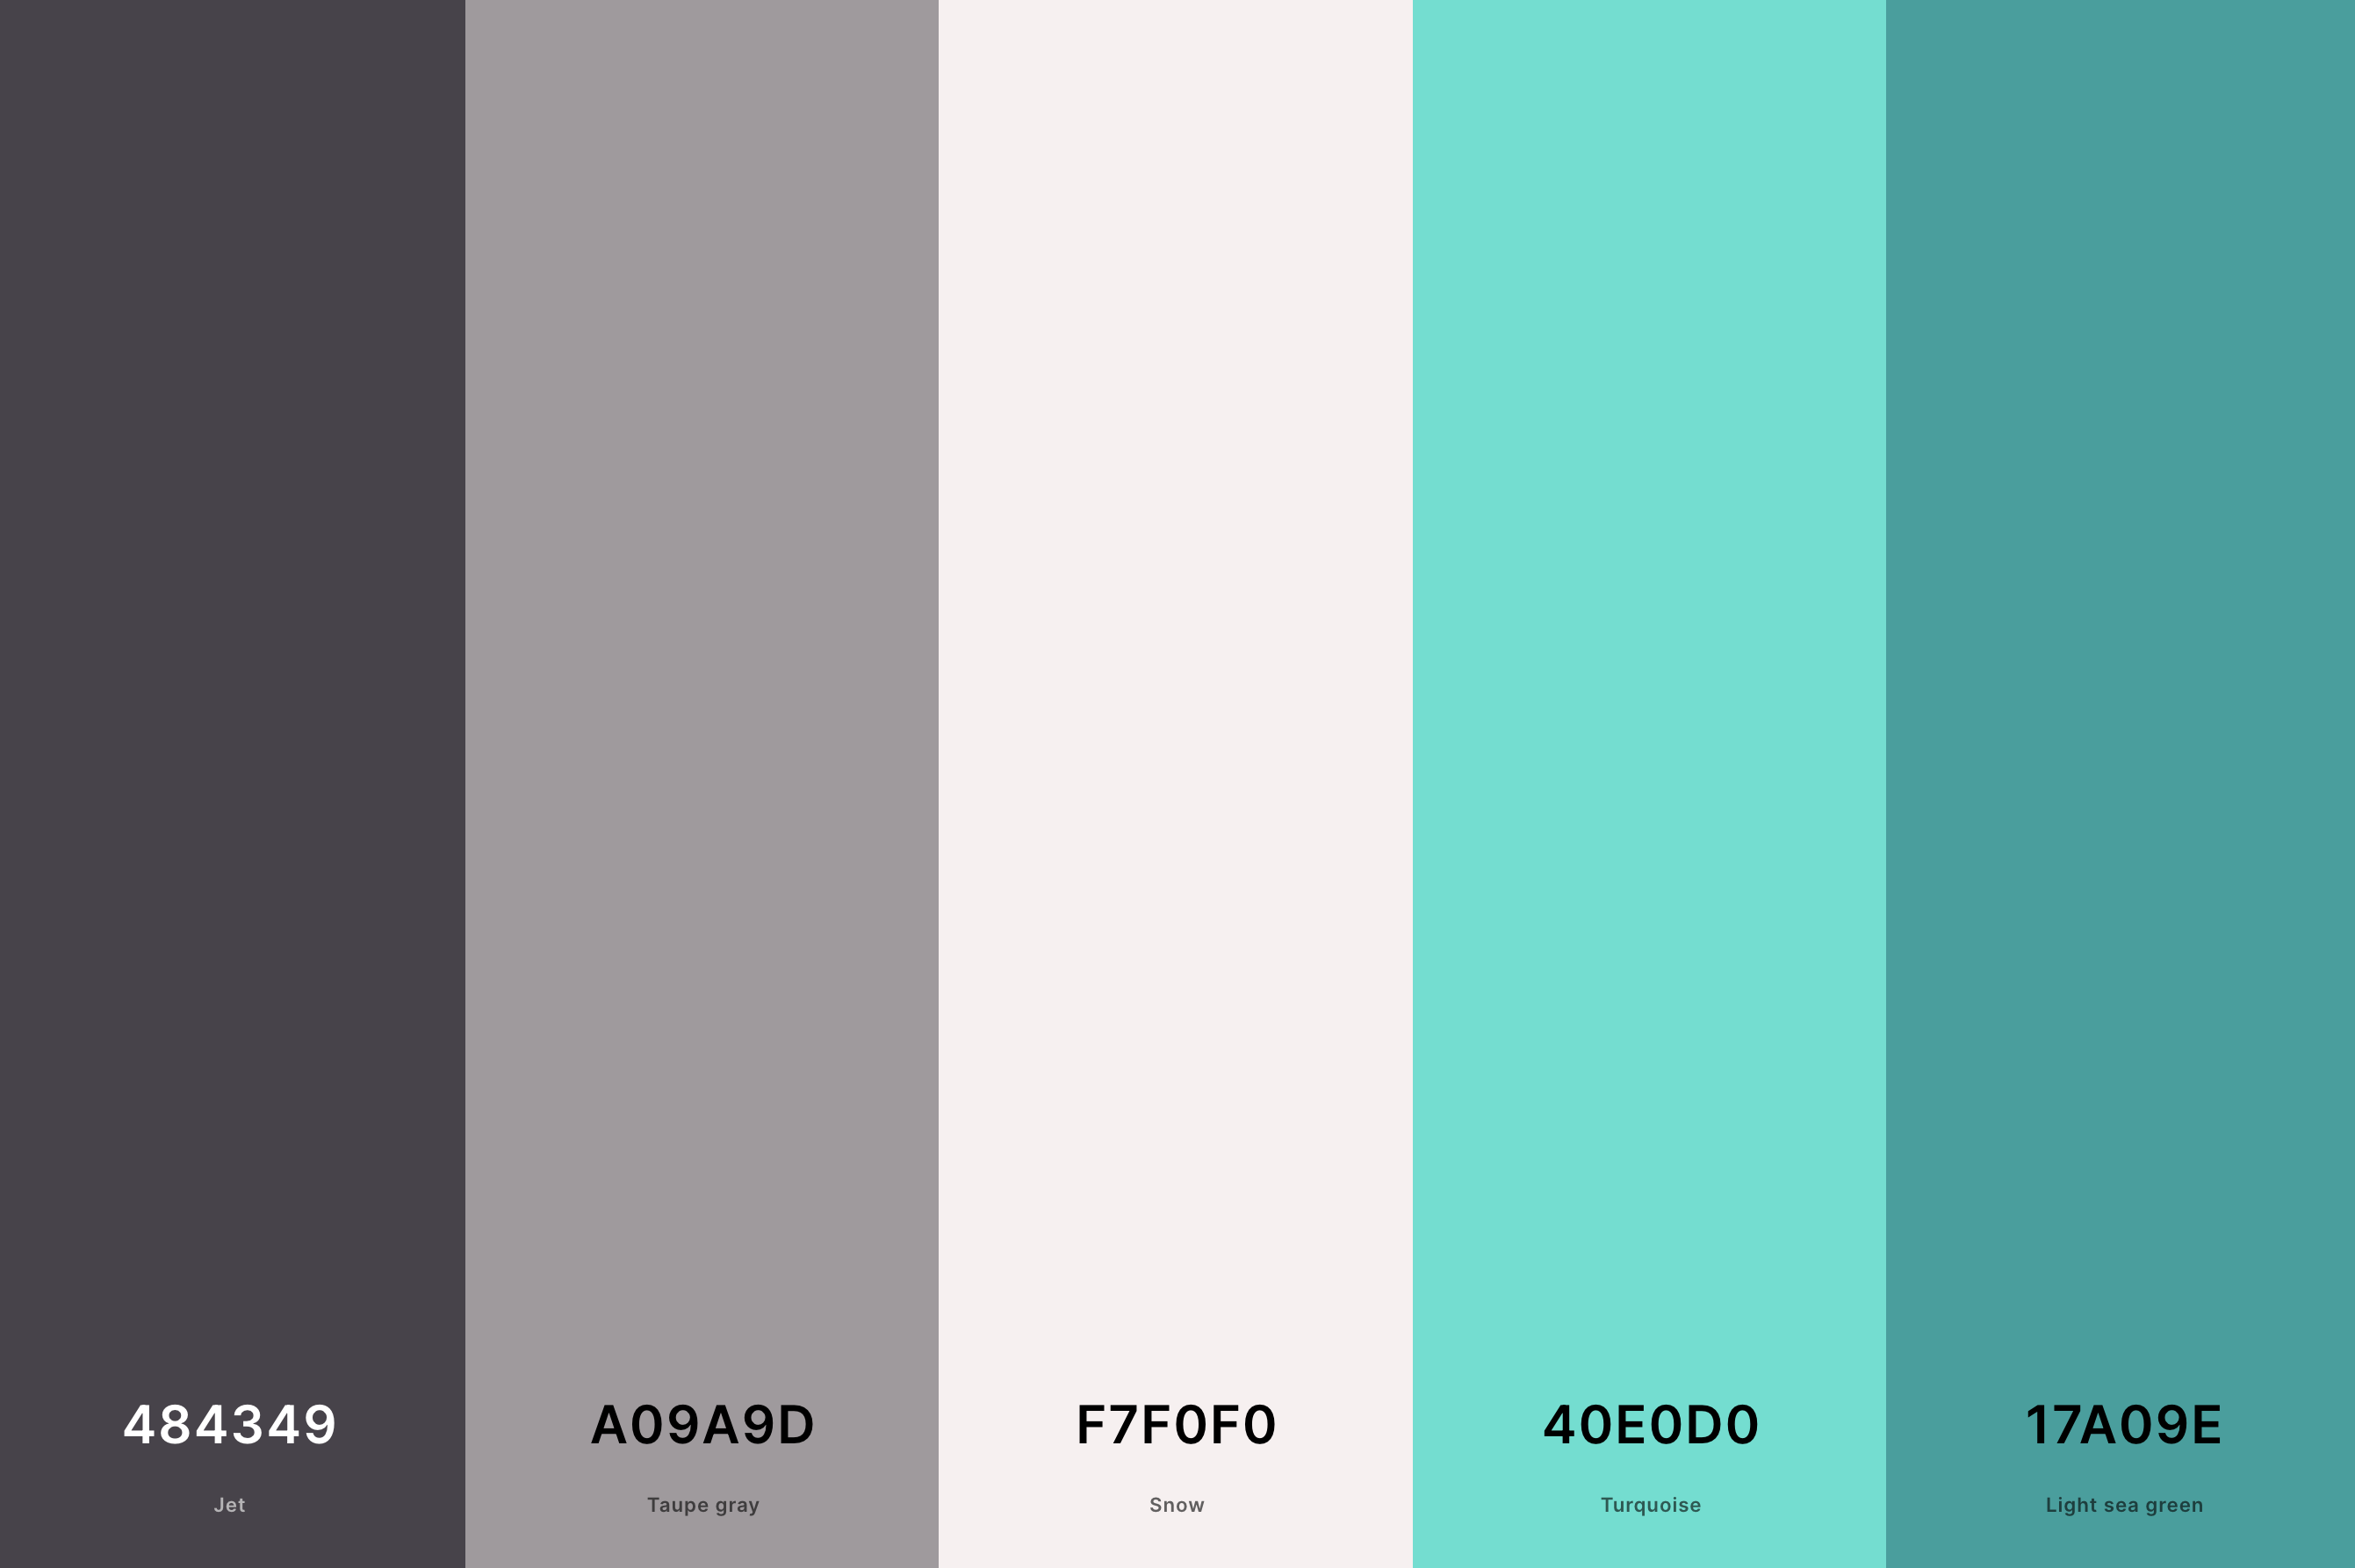 12. Grey And Turquoise Color Palette Color Palette with Jet (Hex #484349) + Taupe Gray (Hex #A09A9D) + Snow (Hex #F7F0F0) + Turquoise (Hex #40E0D0) + Light Sea Green (Hex #17A09E) Color Palette with Hex Codes